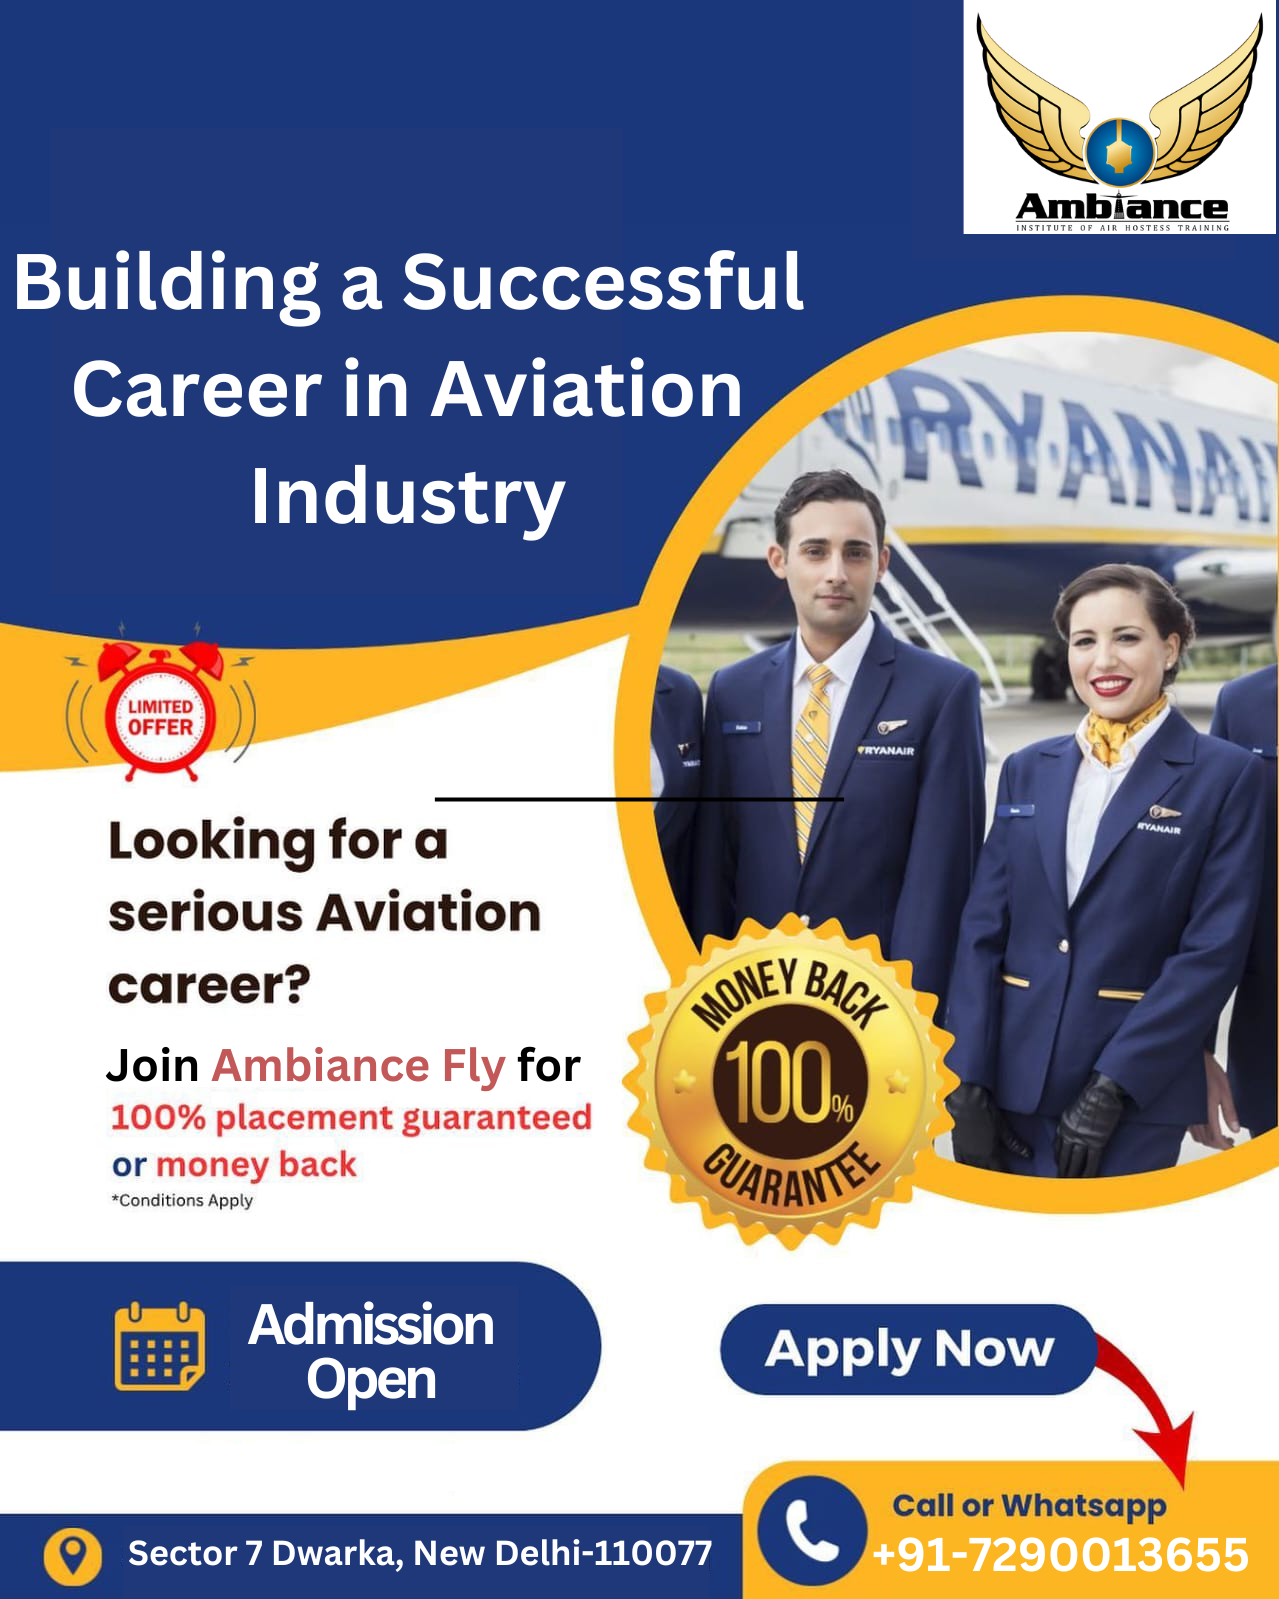 Building a Successful Career in the Aviation Industry